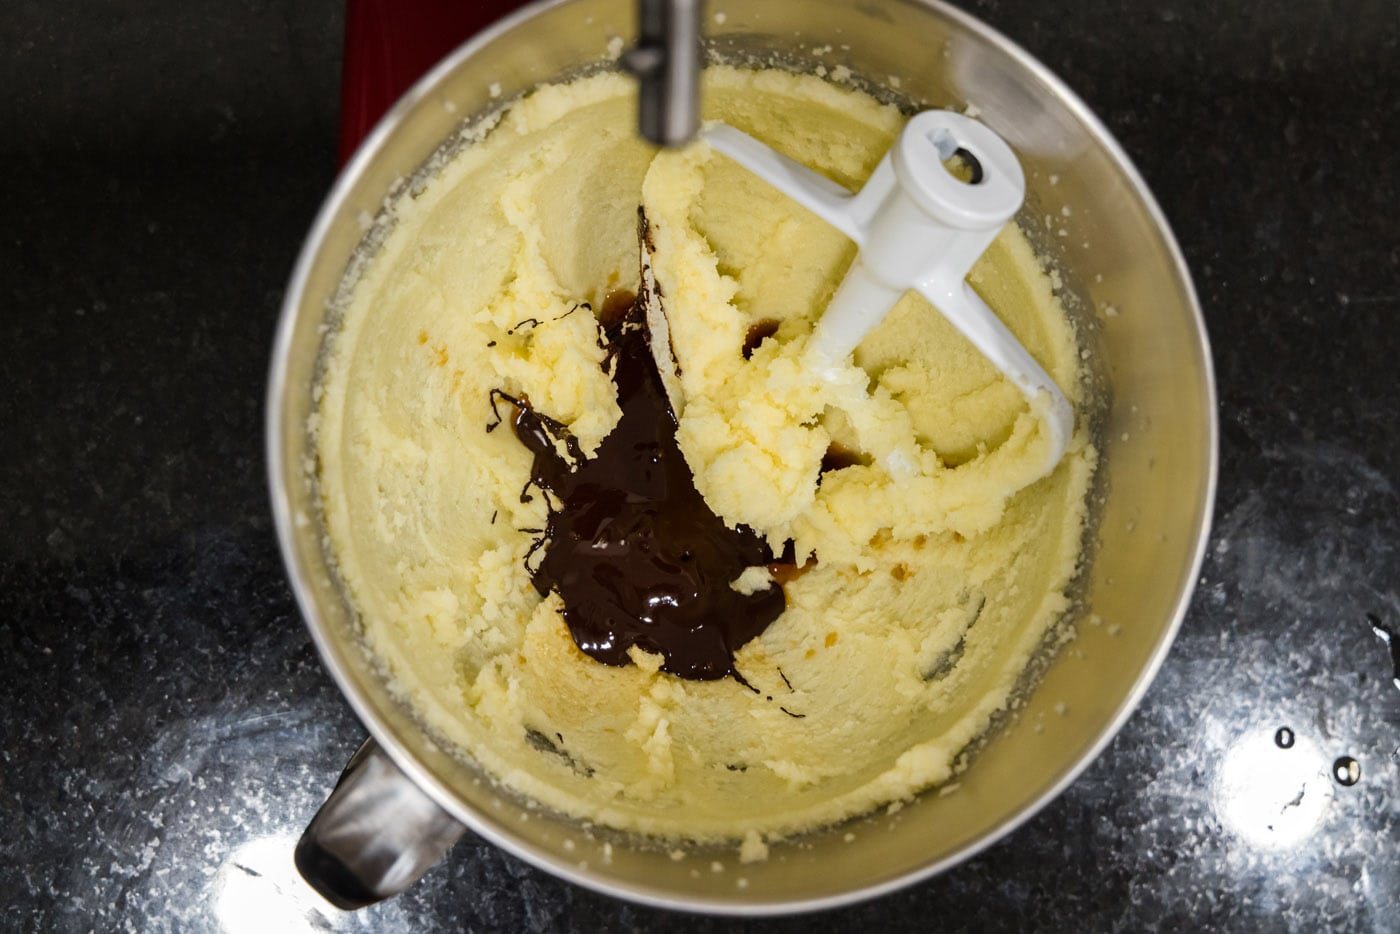 melted chocolate and vanilla added to french silk filling